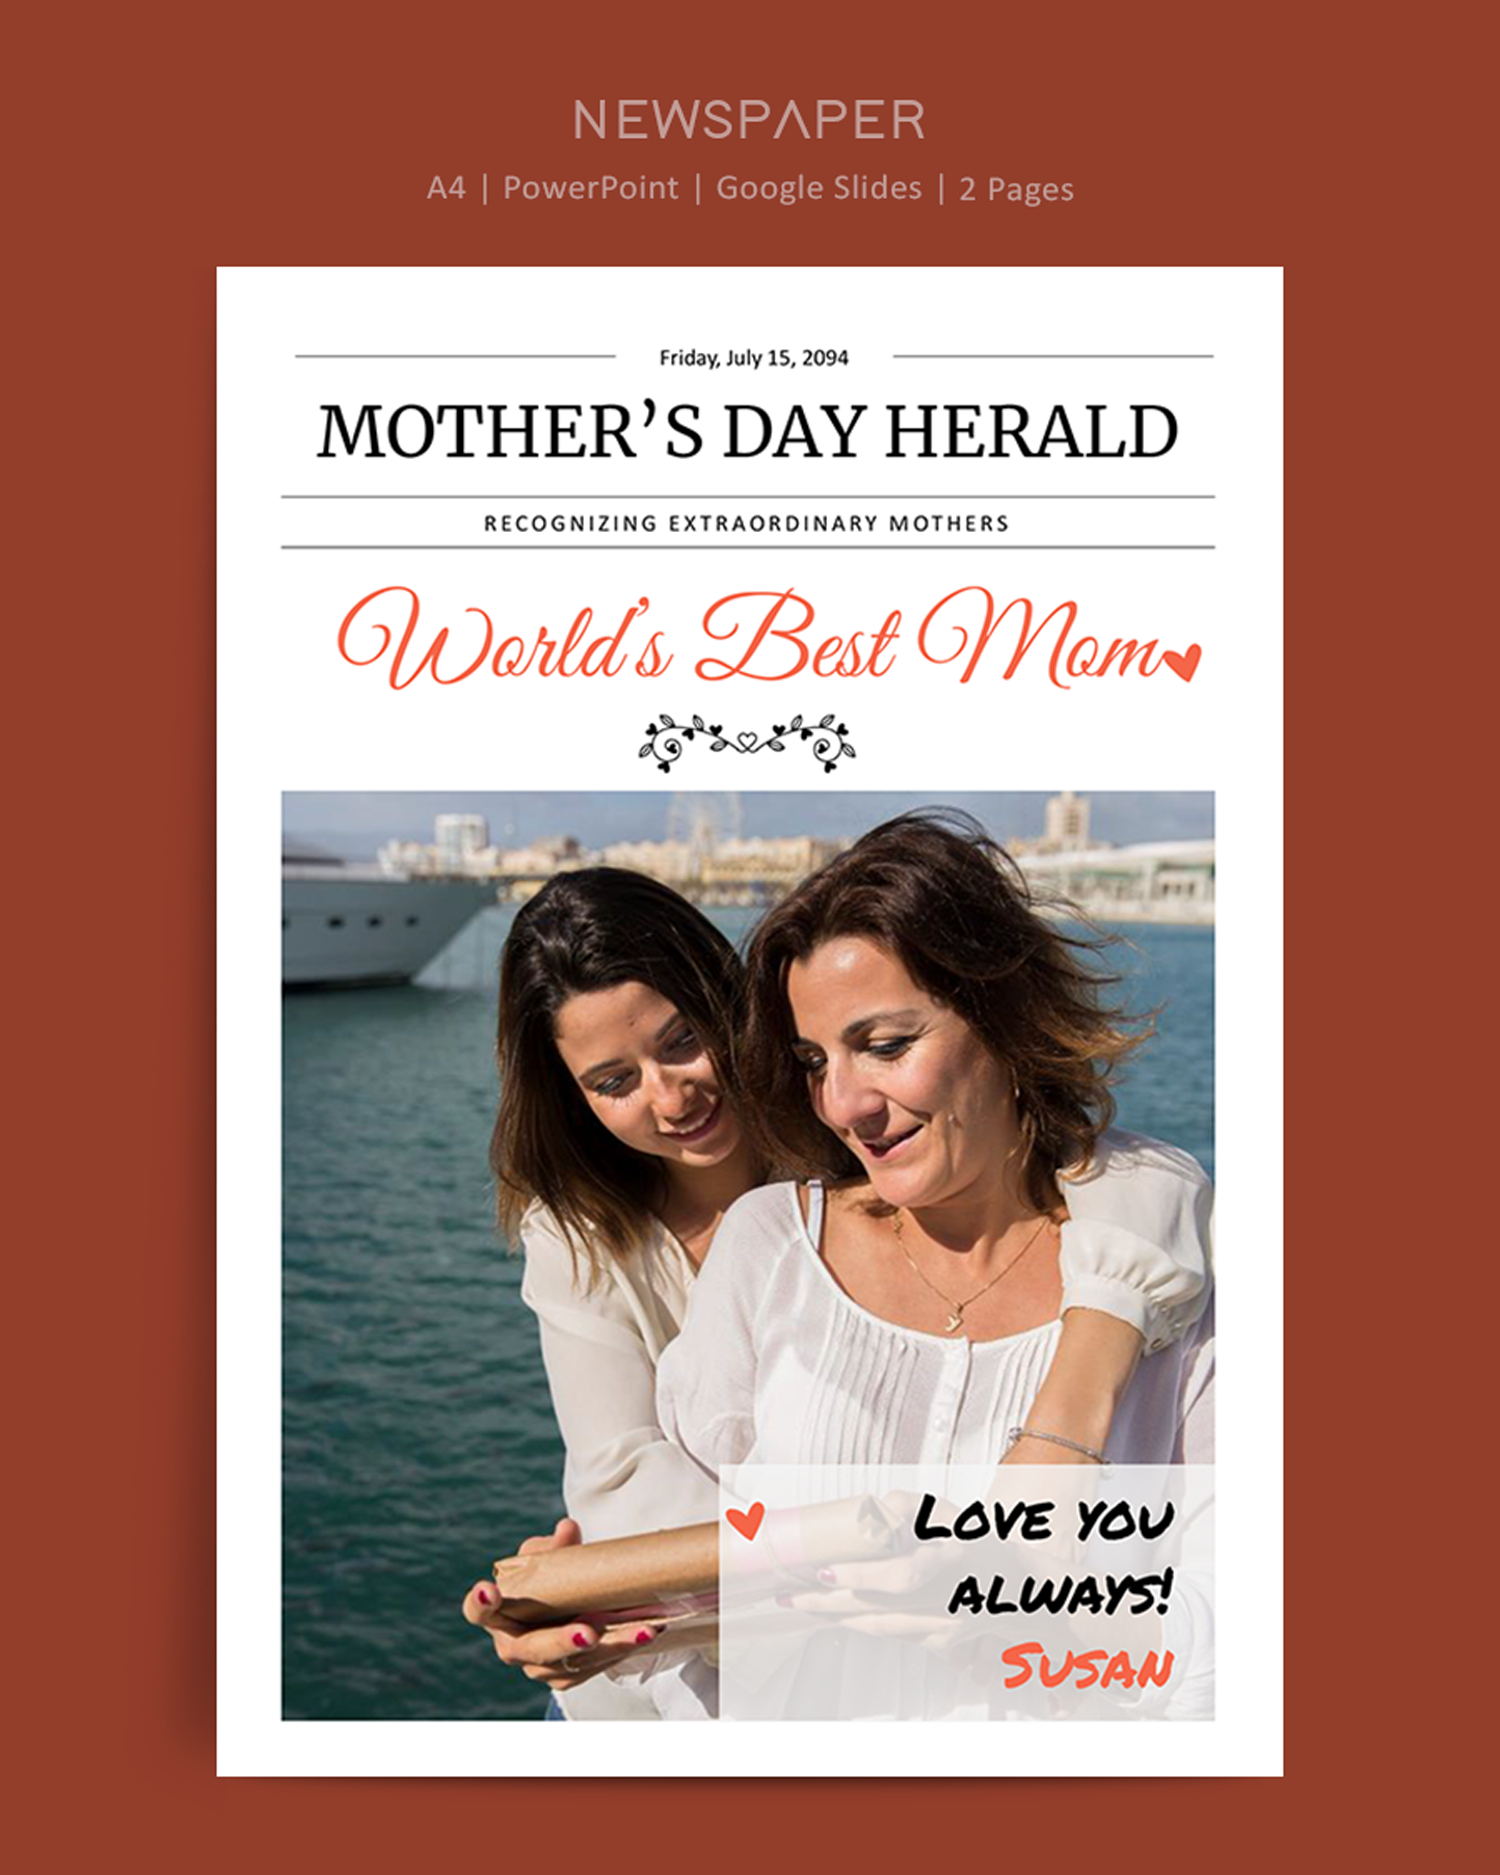 Mothers Day Newspaper Template - PowerPoint, Google Slides